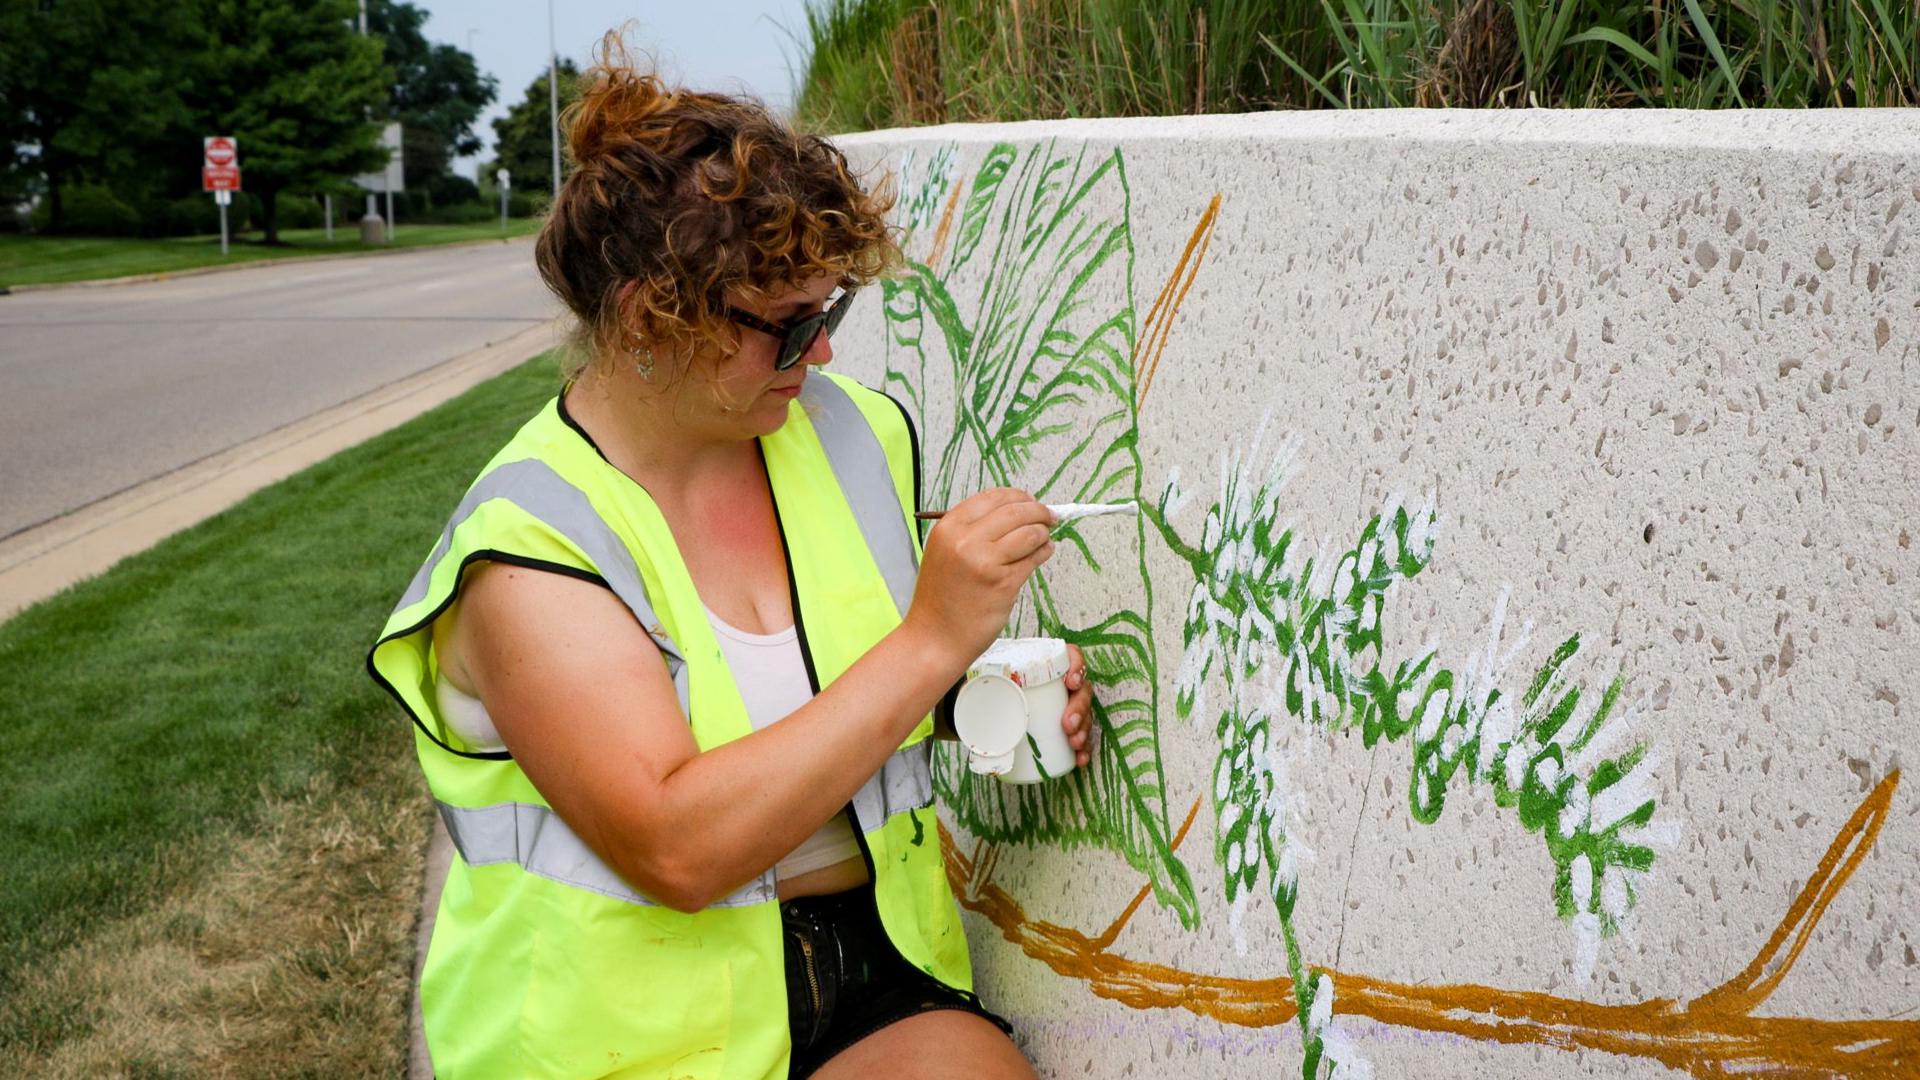 Visitors will see Dania Grevengoed's artwork of native Michigan plants as they leave or enter the airport.